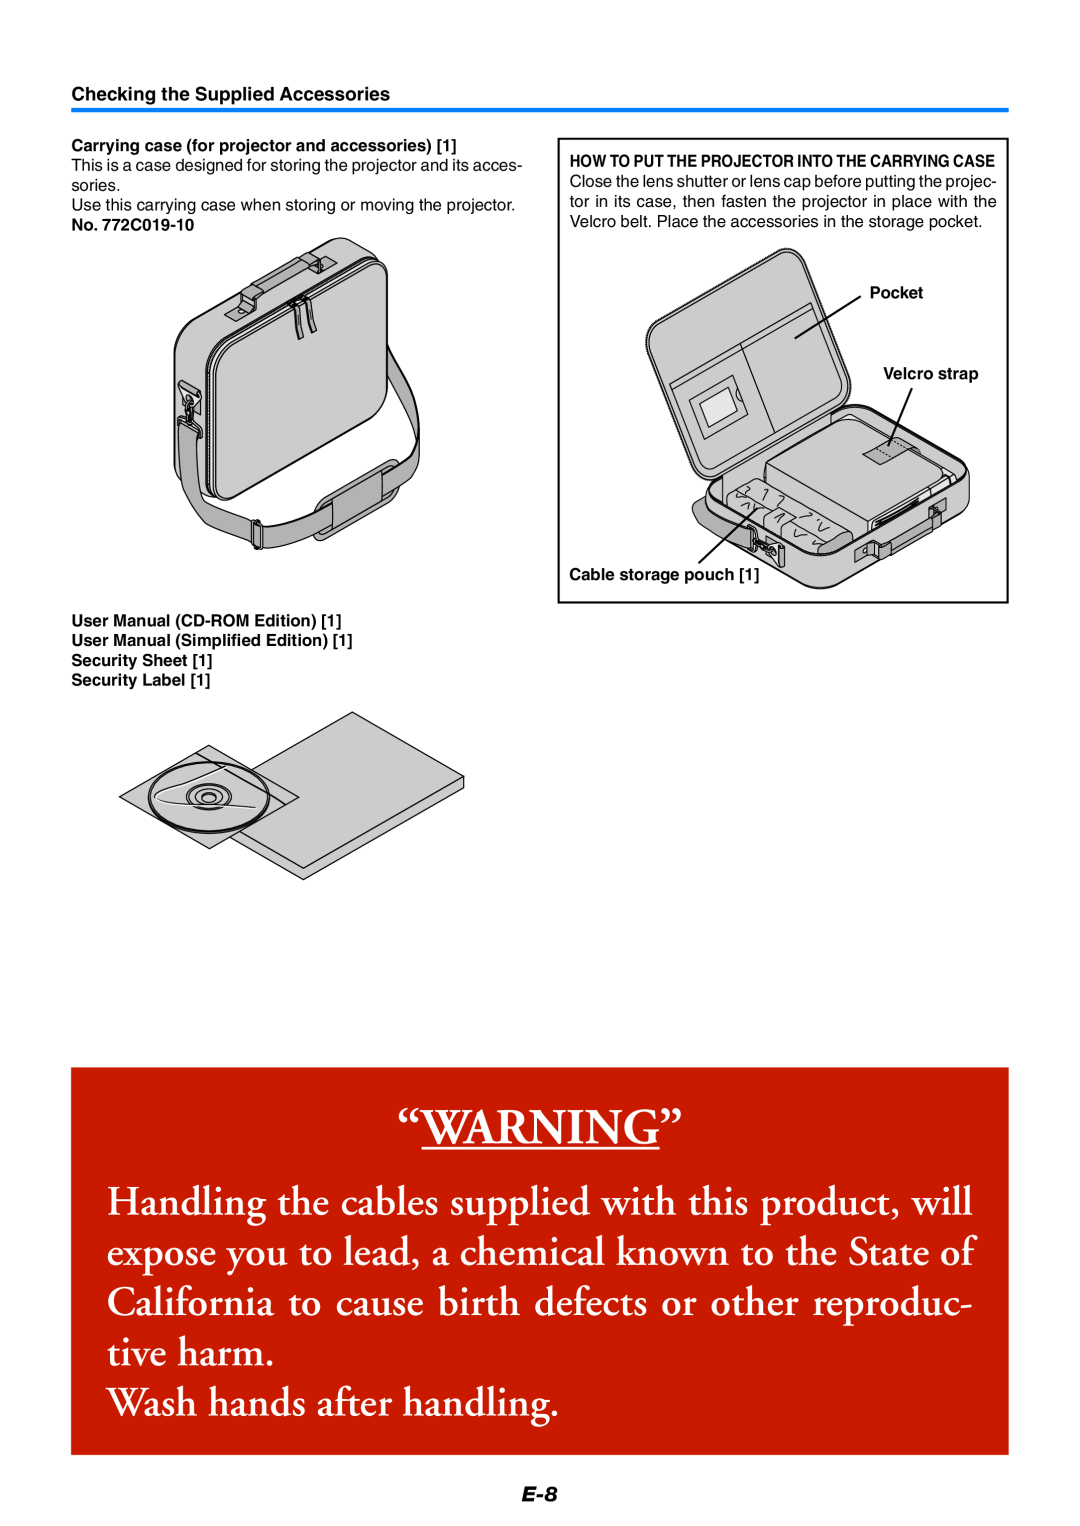 Mitsubishi Electronics XD60U user manual “Warning”, Wash hands after handling, Checking the Supplied Accessories 